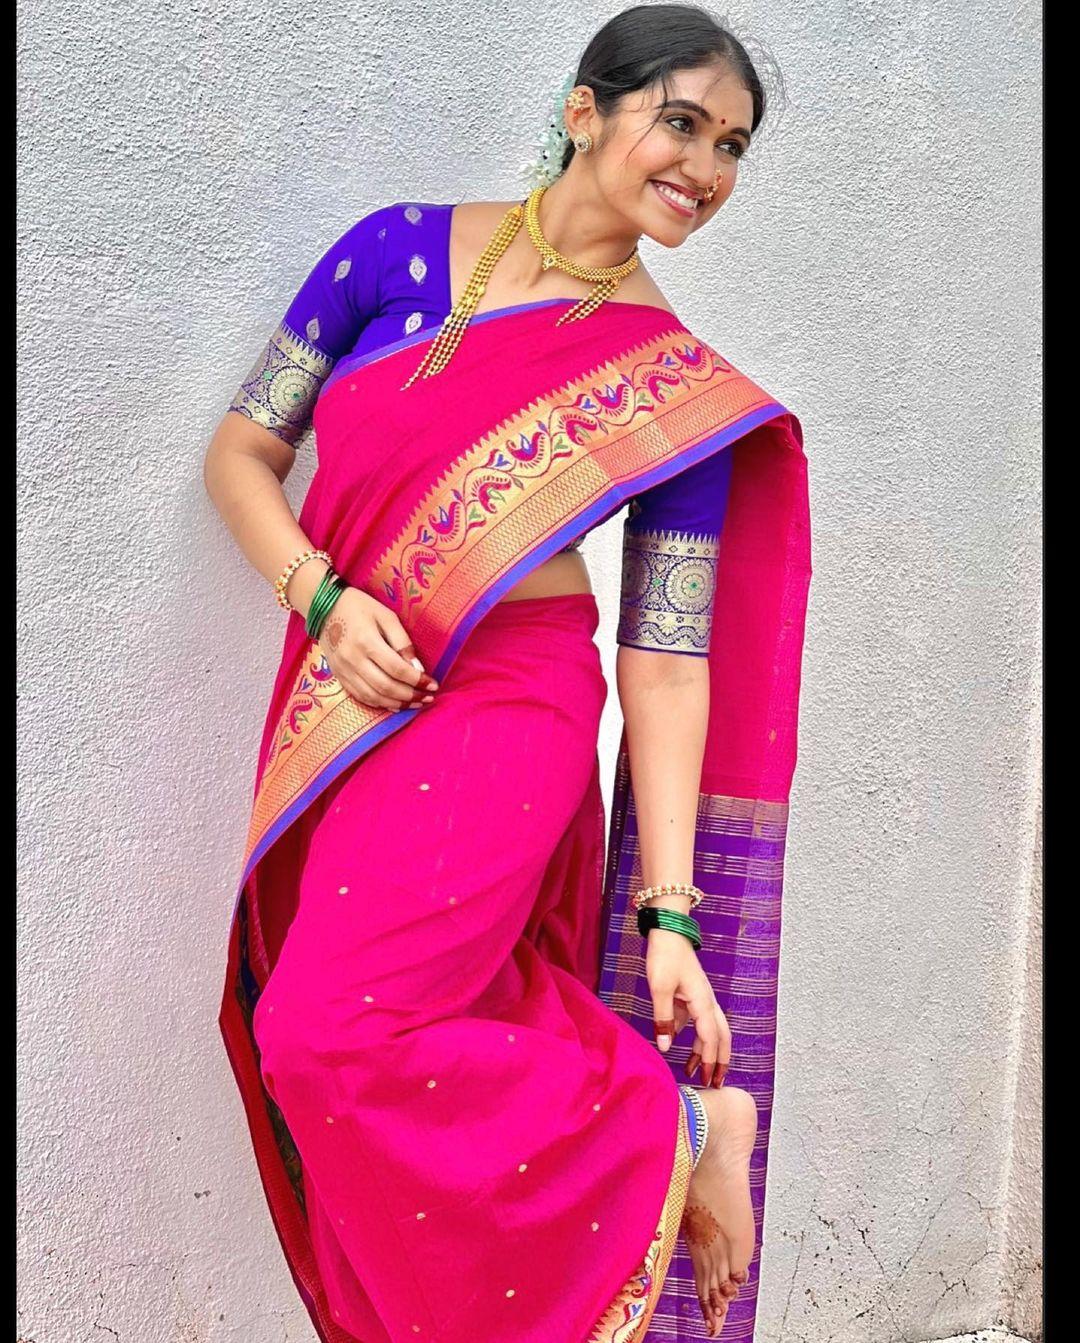 Rinku Rajguru is one of the most loved actresses of the Marathi film industry. The 'Zhingat' girl never disappoints us when it comes to slaying in tradition. In this look, Rinku wore a stunning Paithani saree that stole our hearts